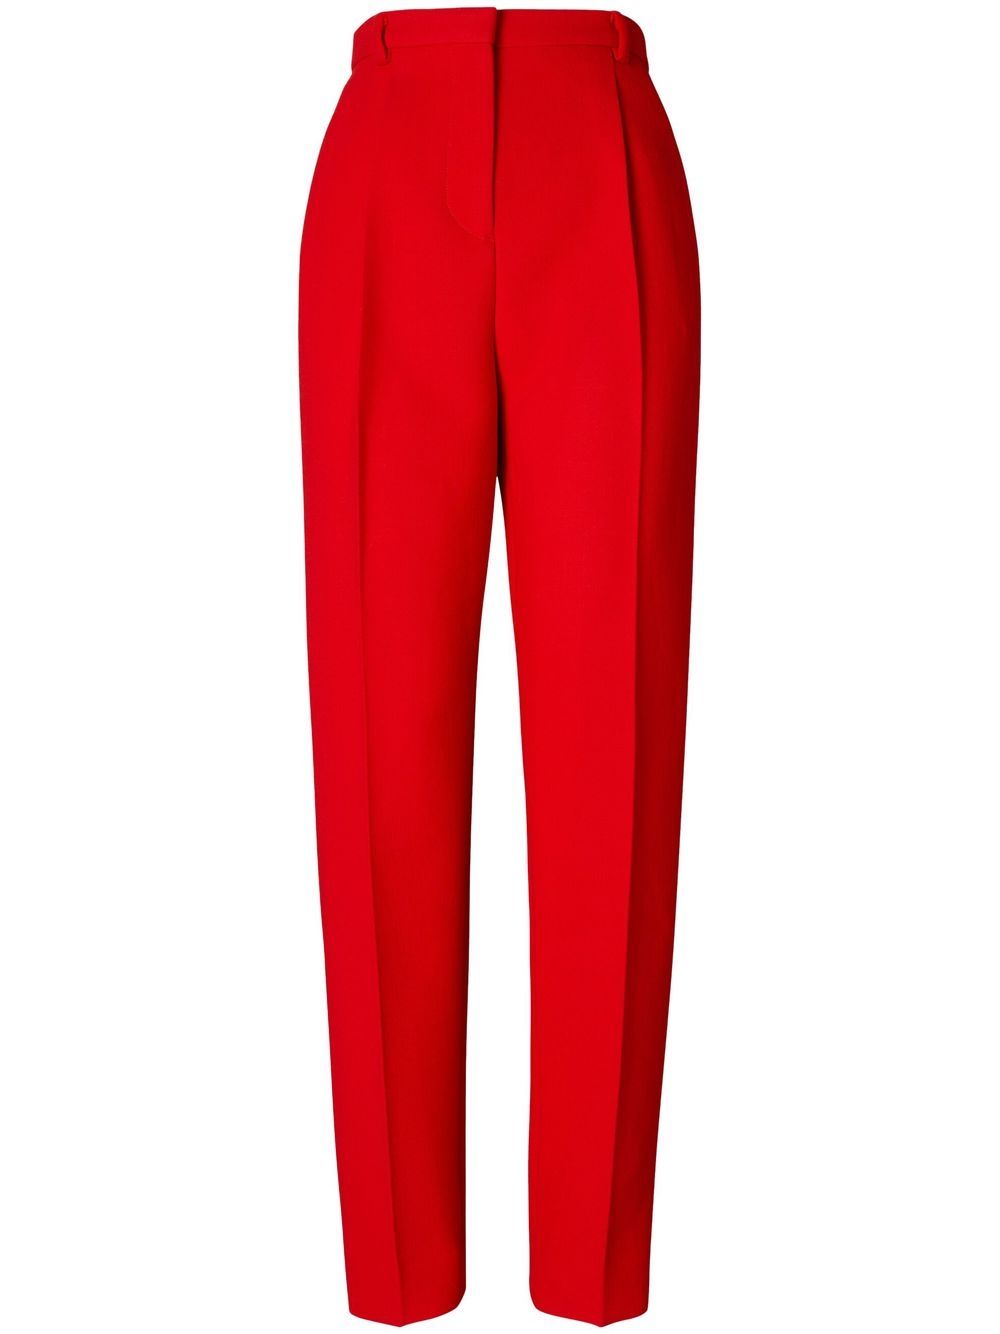 Tory Burch double-faced wool trousers - Red von Tory Burch